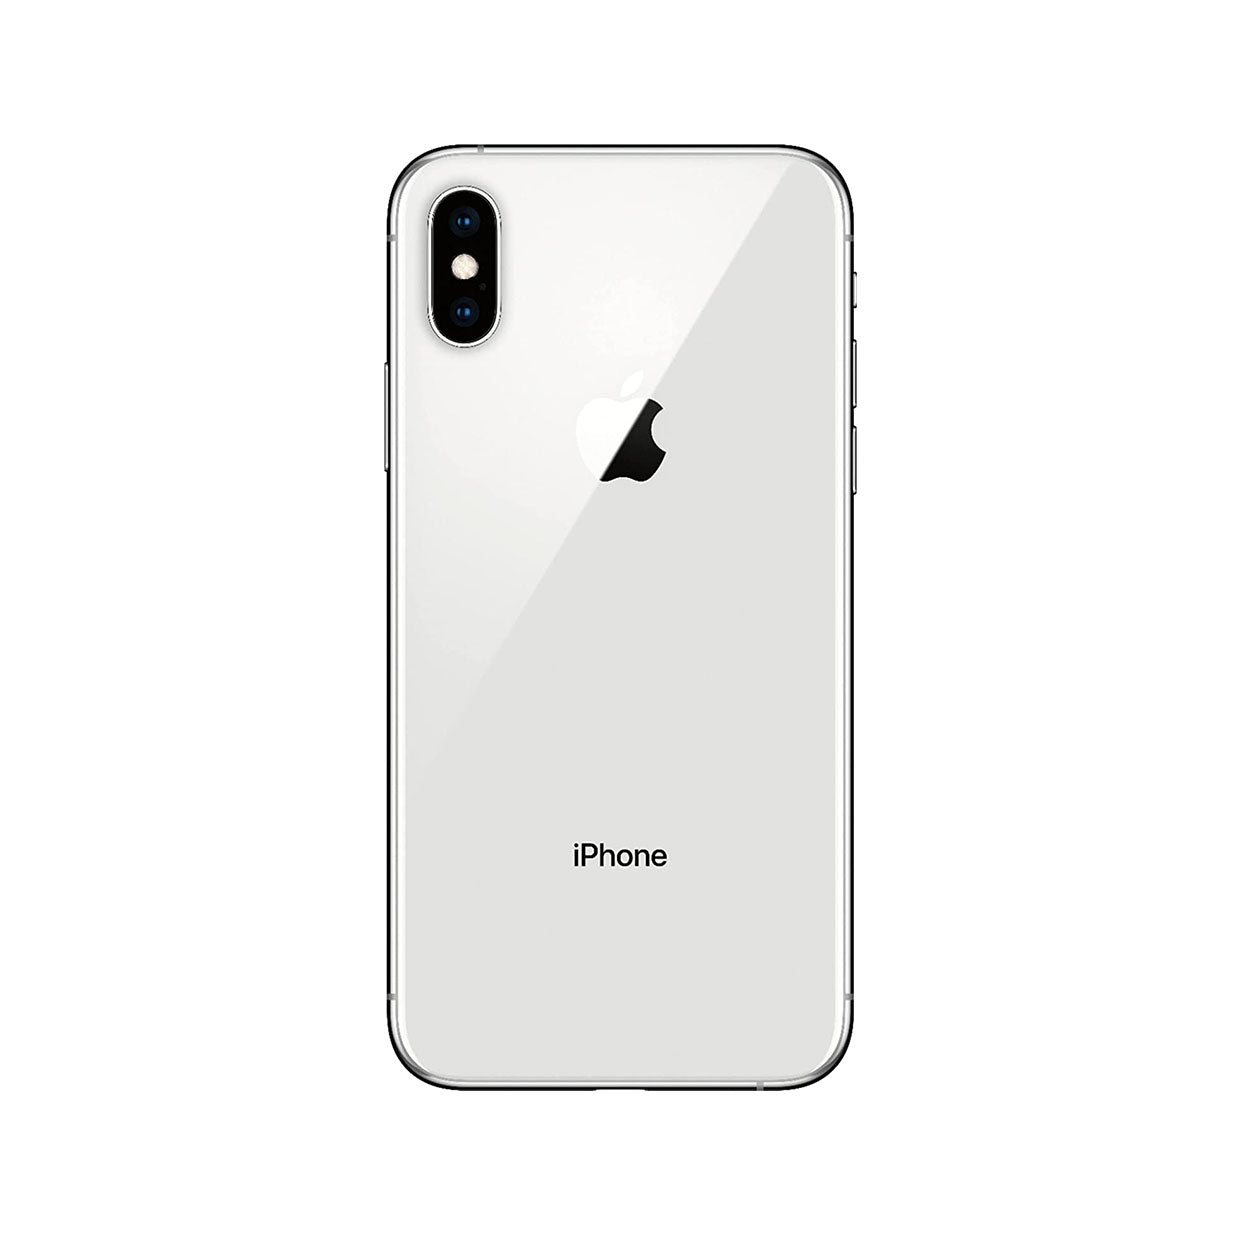 Apple iPhone XS MAX 64GB 4G LTE - Silver